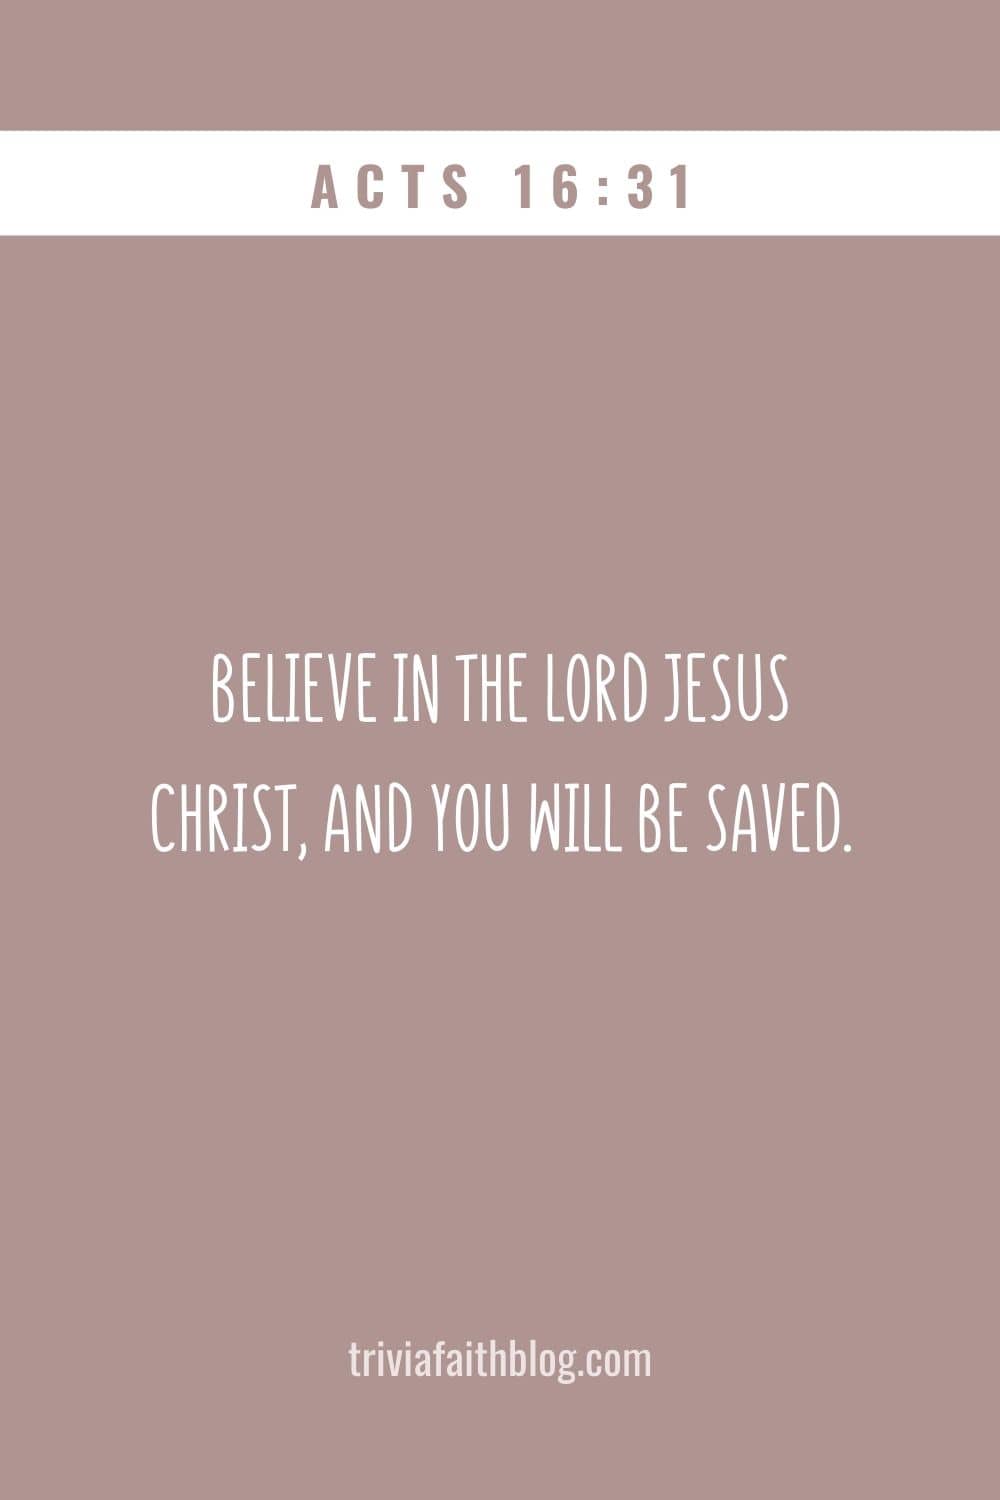 Believe in the Lord Jesus Christ, and you will be saved